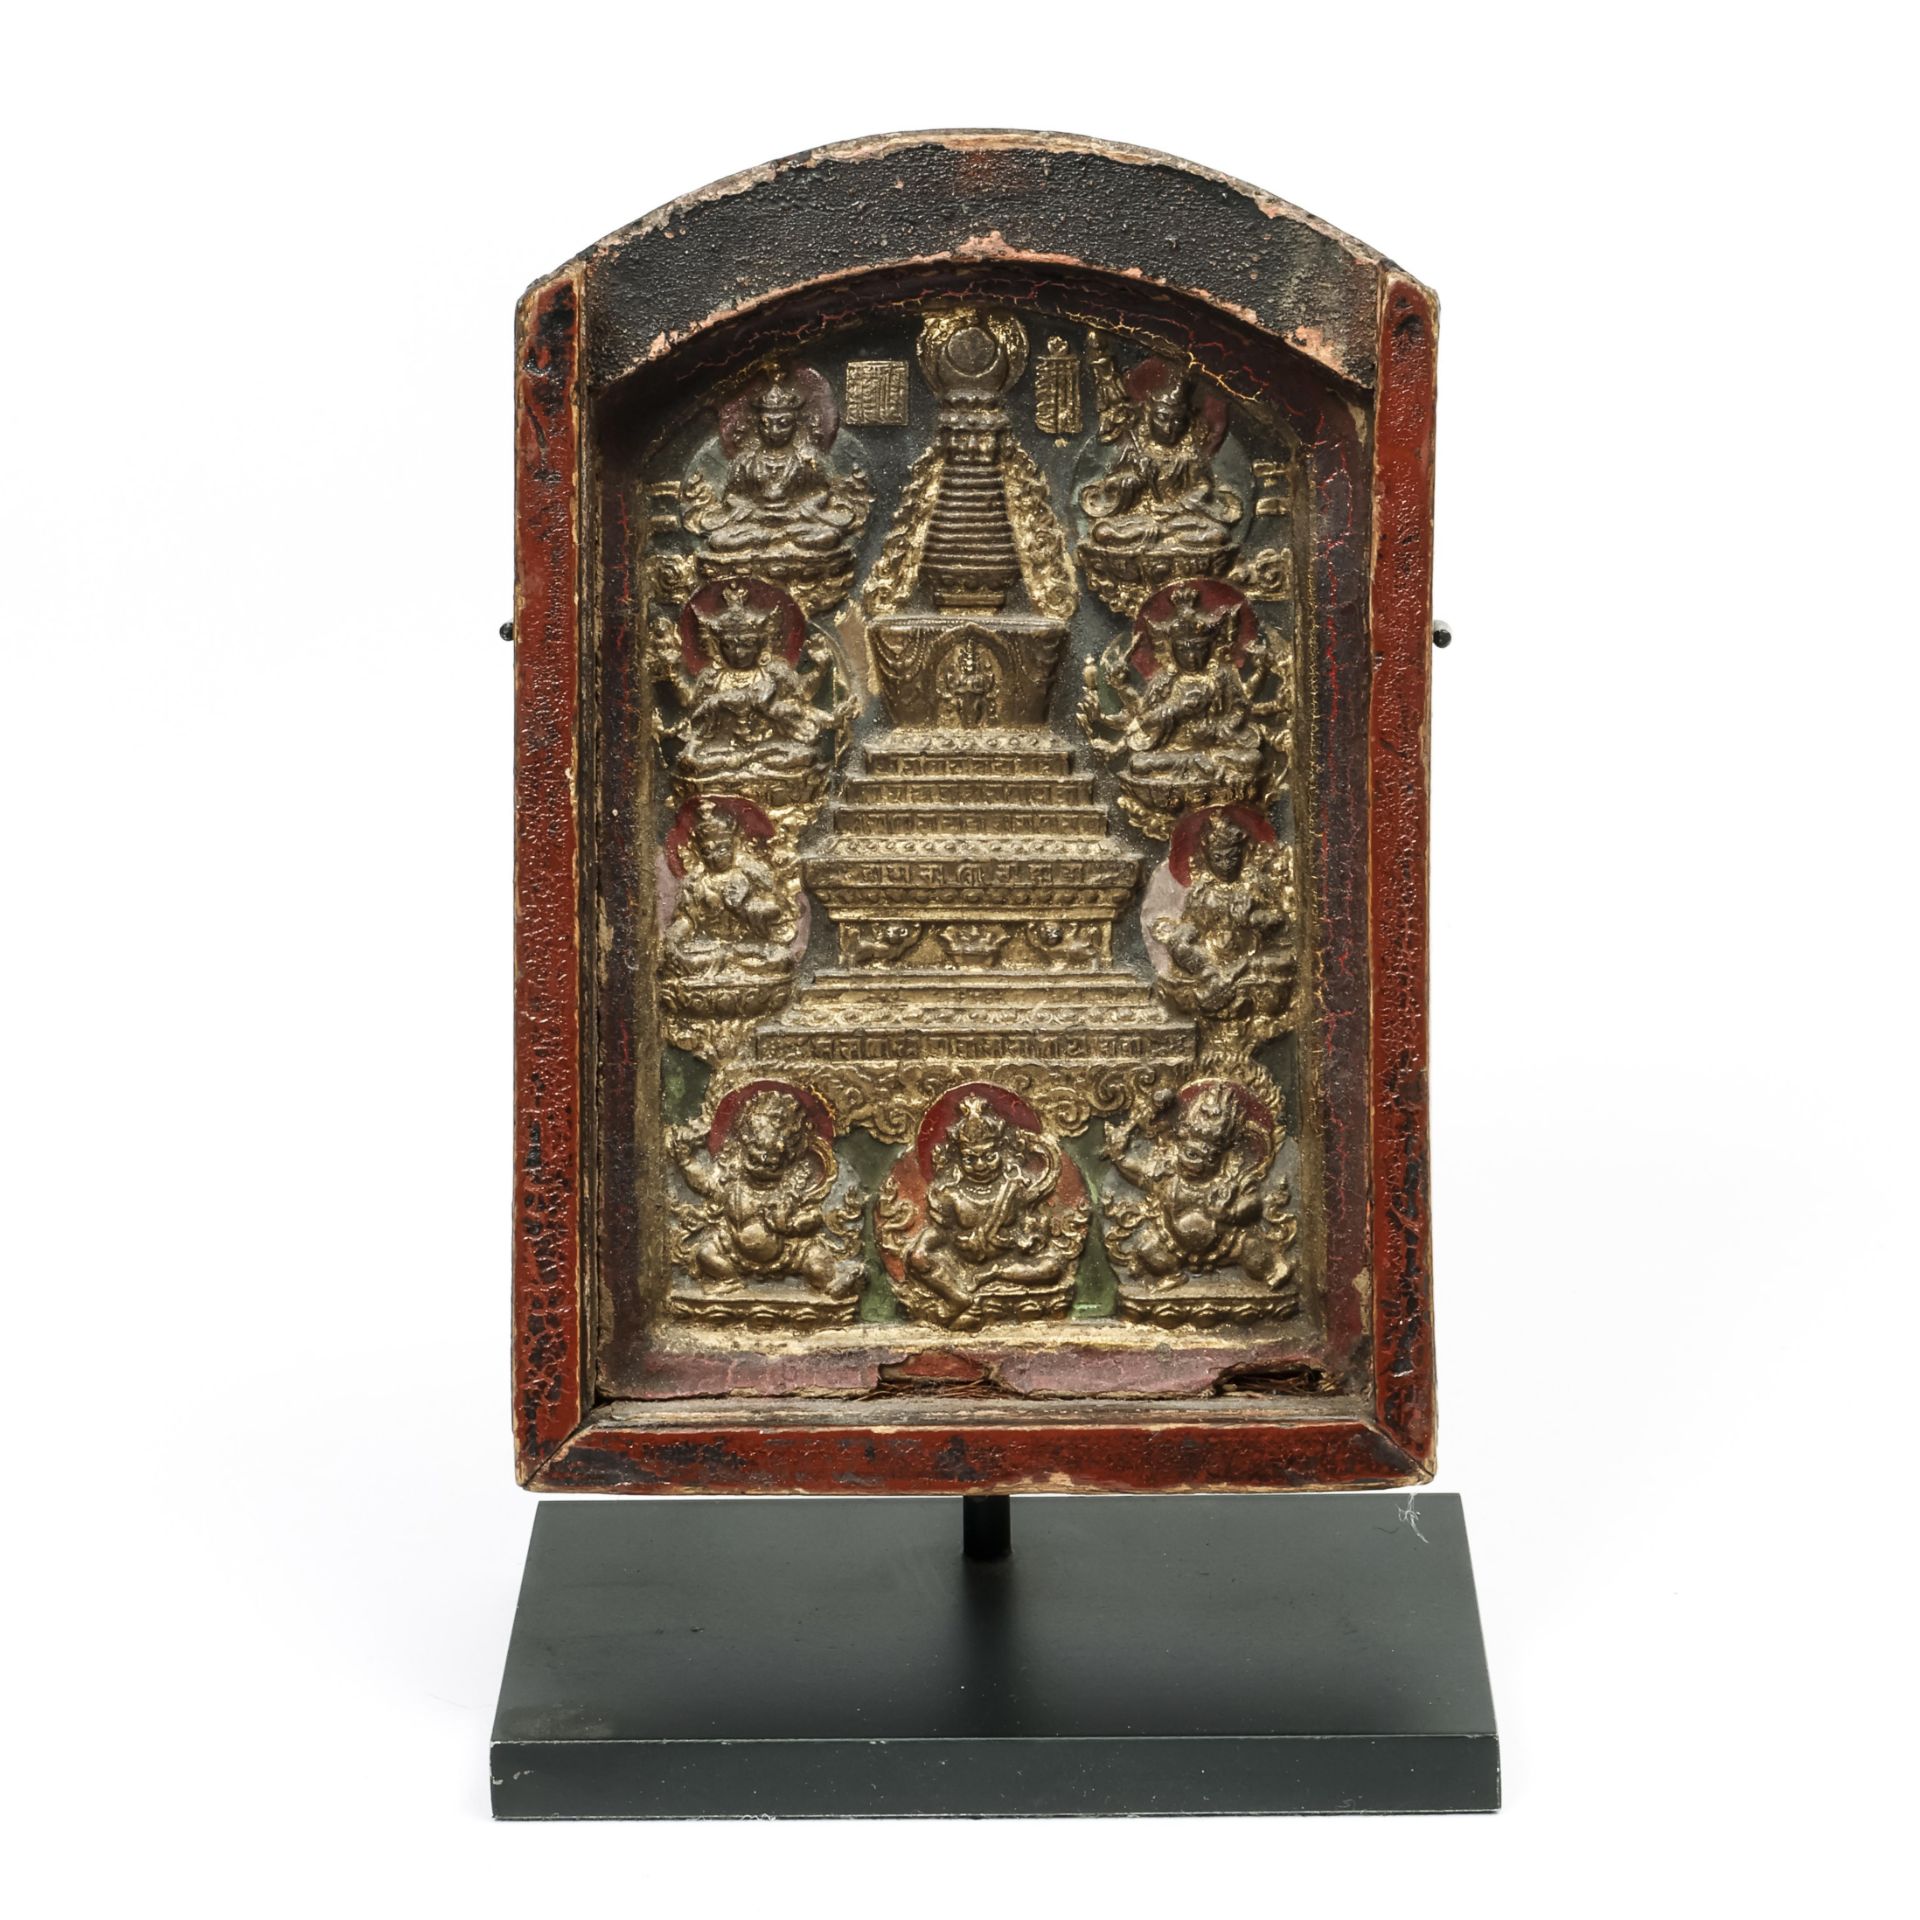 Mongolia, a wooden traveling shrine, ca. 18th century,